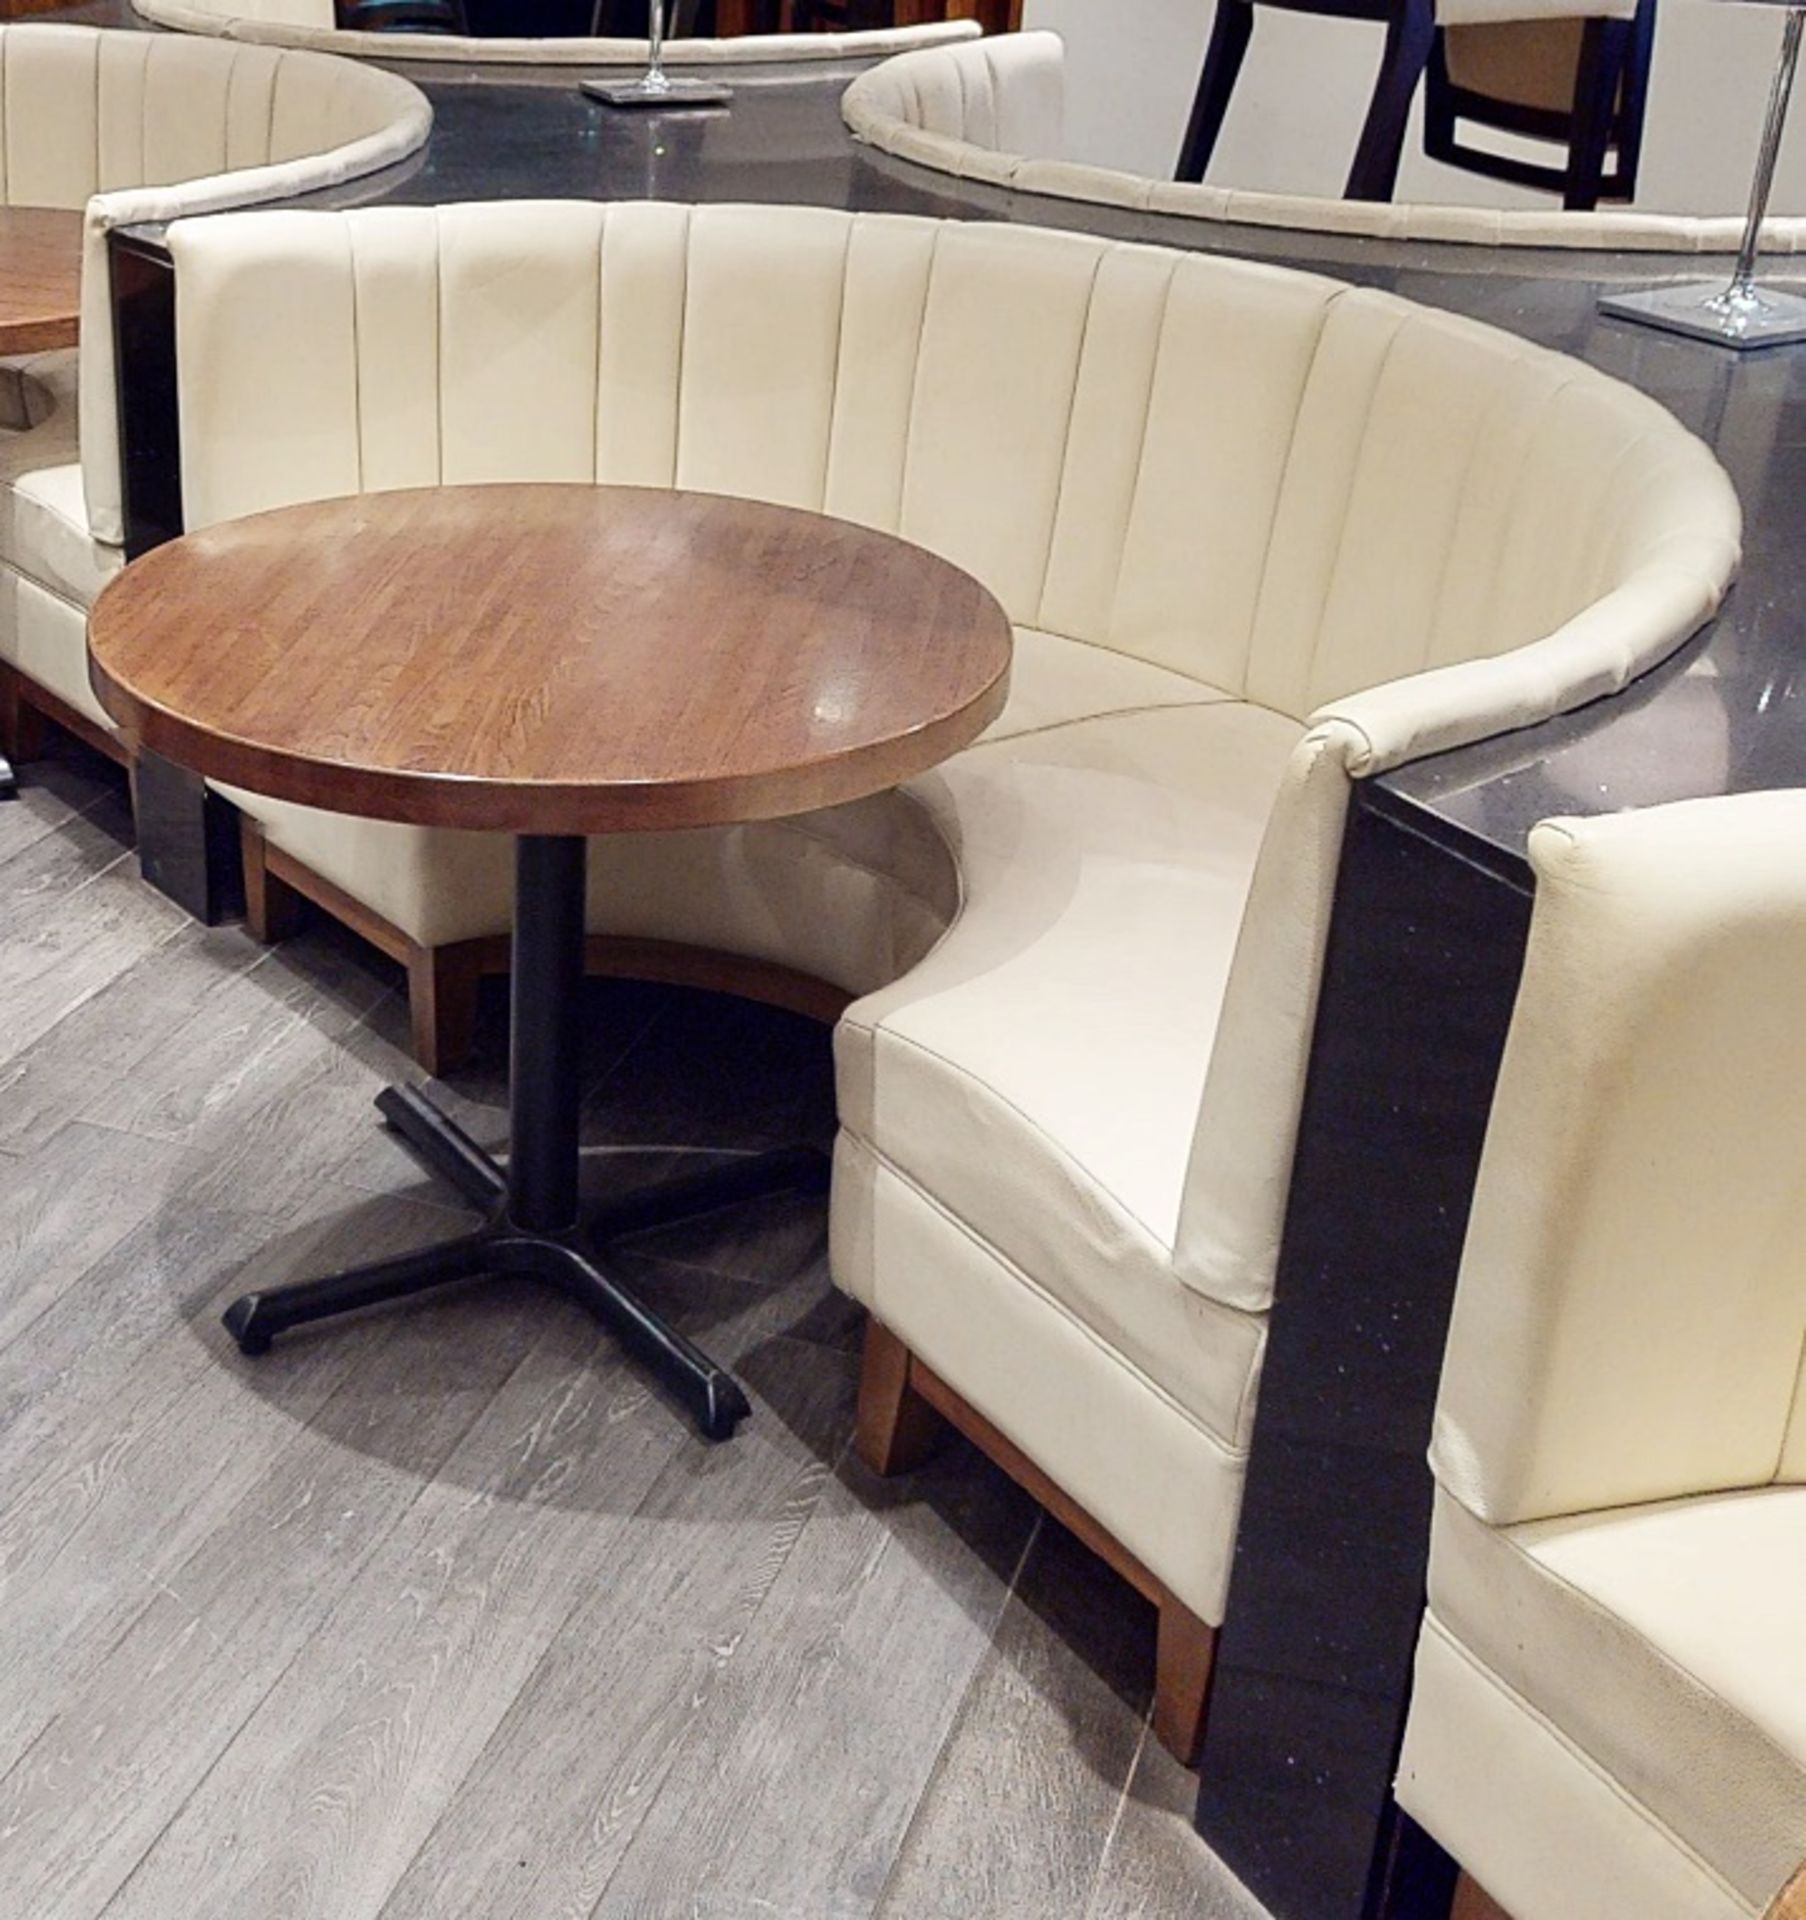 1 x Restaurant C-Shaped Booth Seating, Upholstered In A Cream Faux Leather, With A Pleated High Back - Image 2 of 2